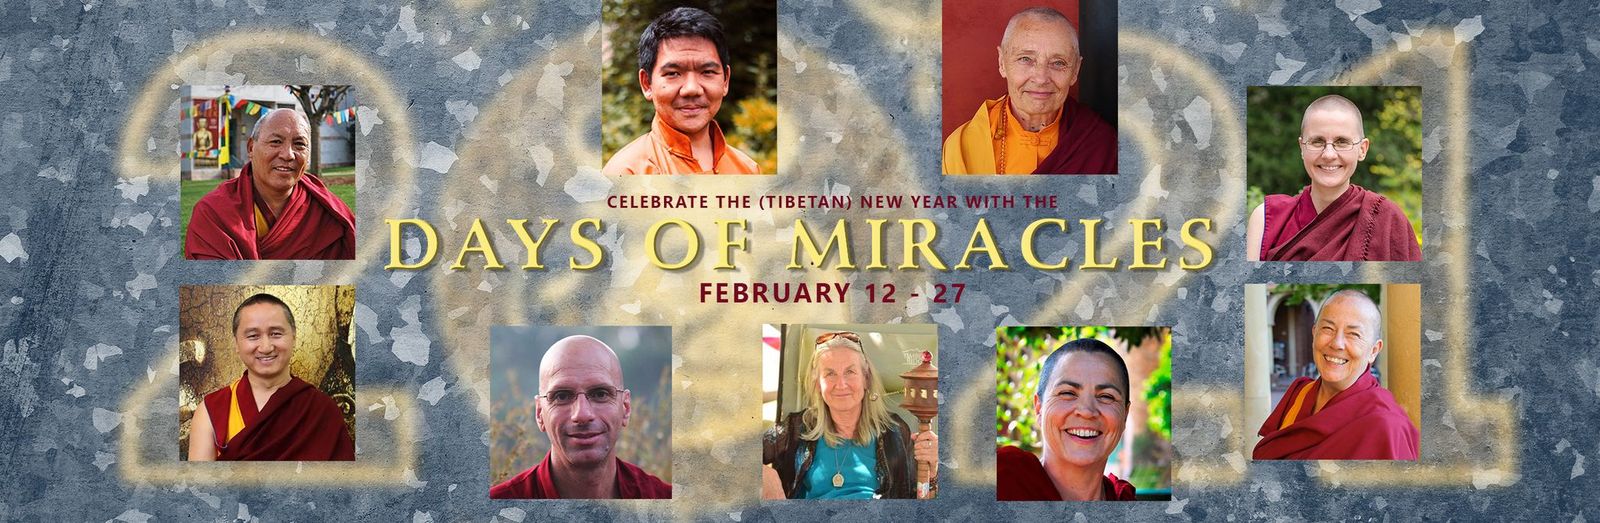 Celebrate the Days of Miracles with 9 Amazing Teachers